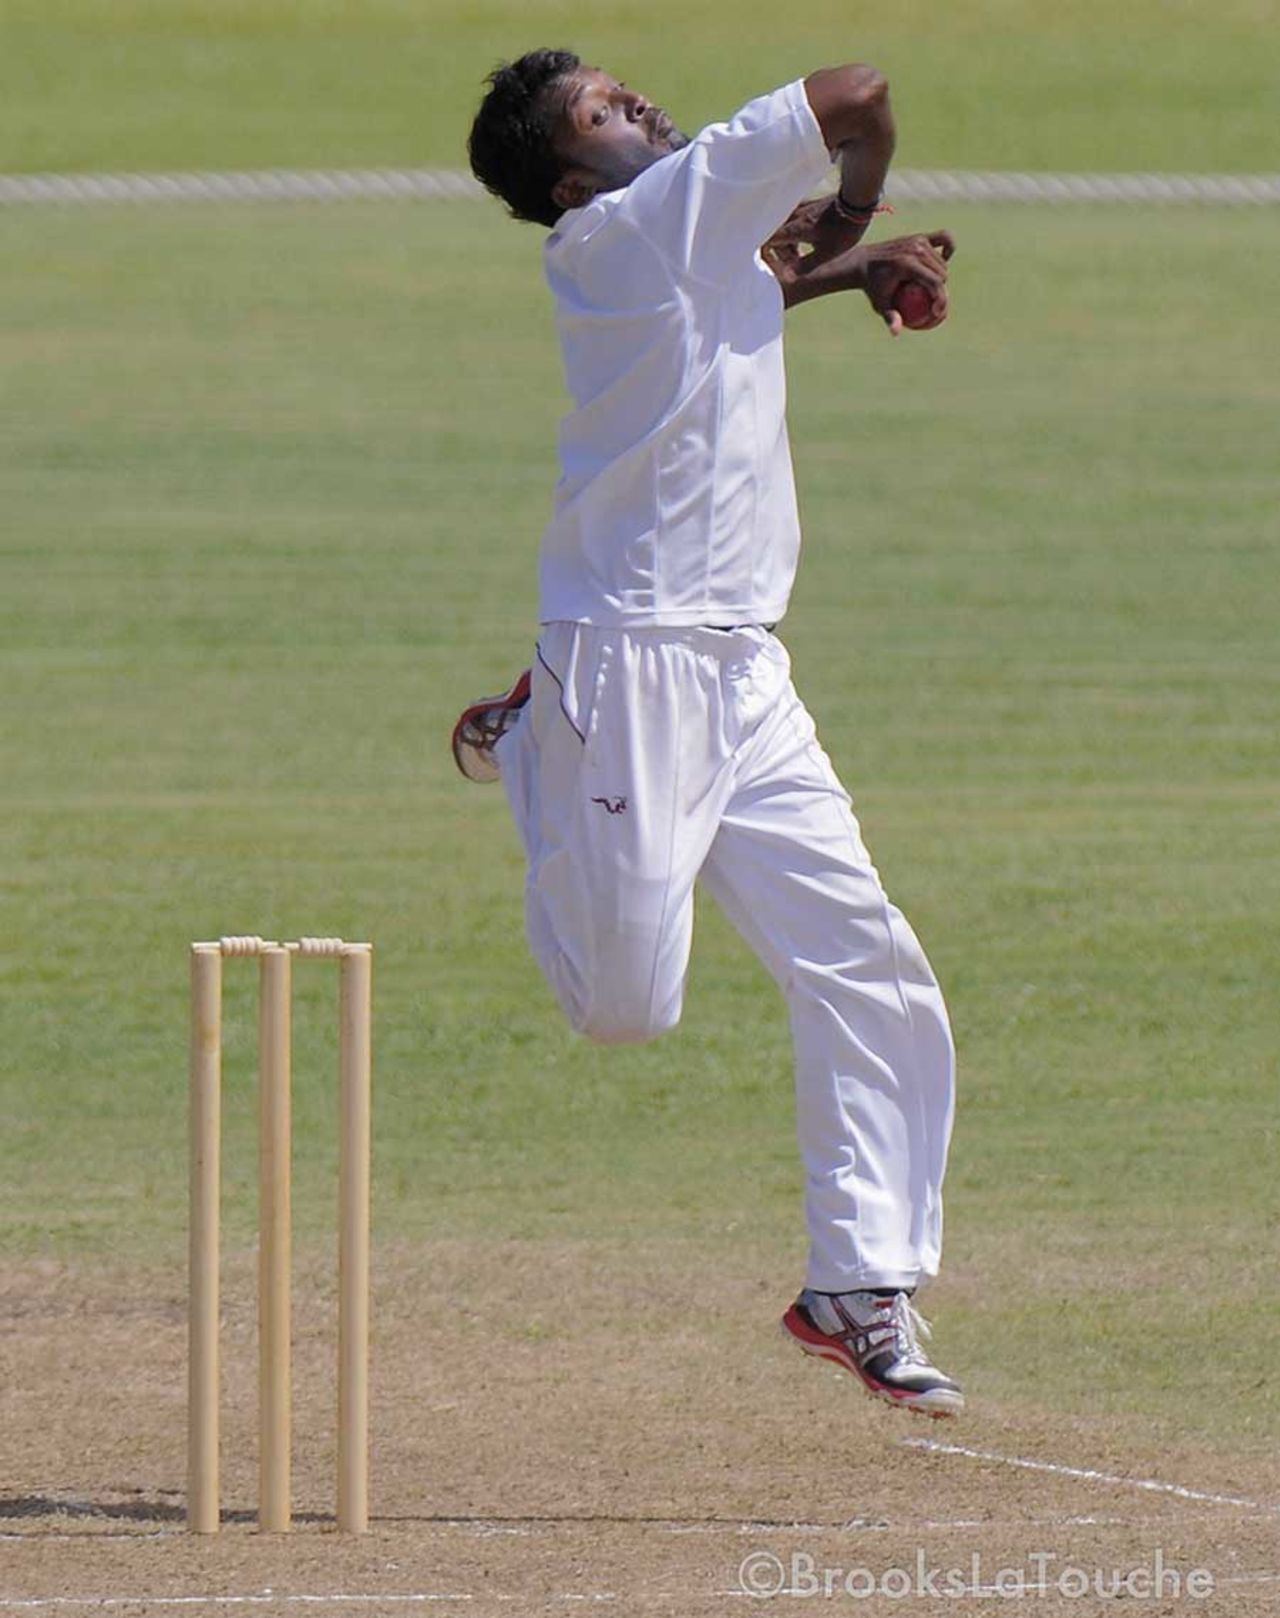 Veerasammy Permaul picked up 5 for 58, West Indies A v India A, 2nd unofficial Test, St Vincent, 2nd day, June 10, 2012